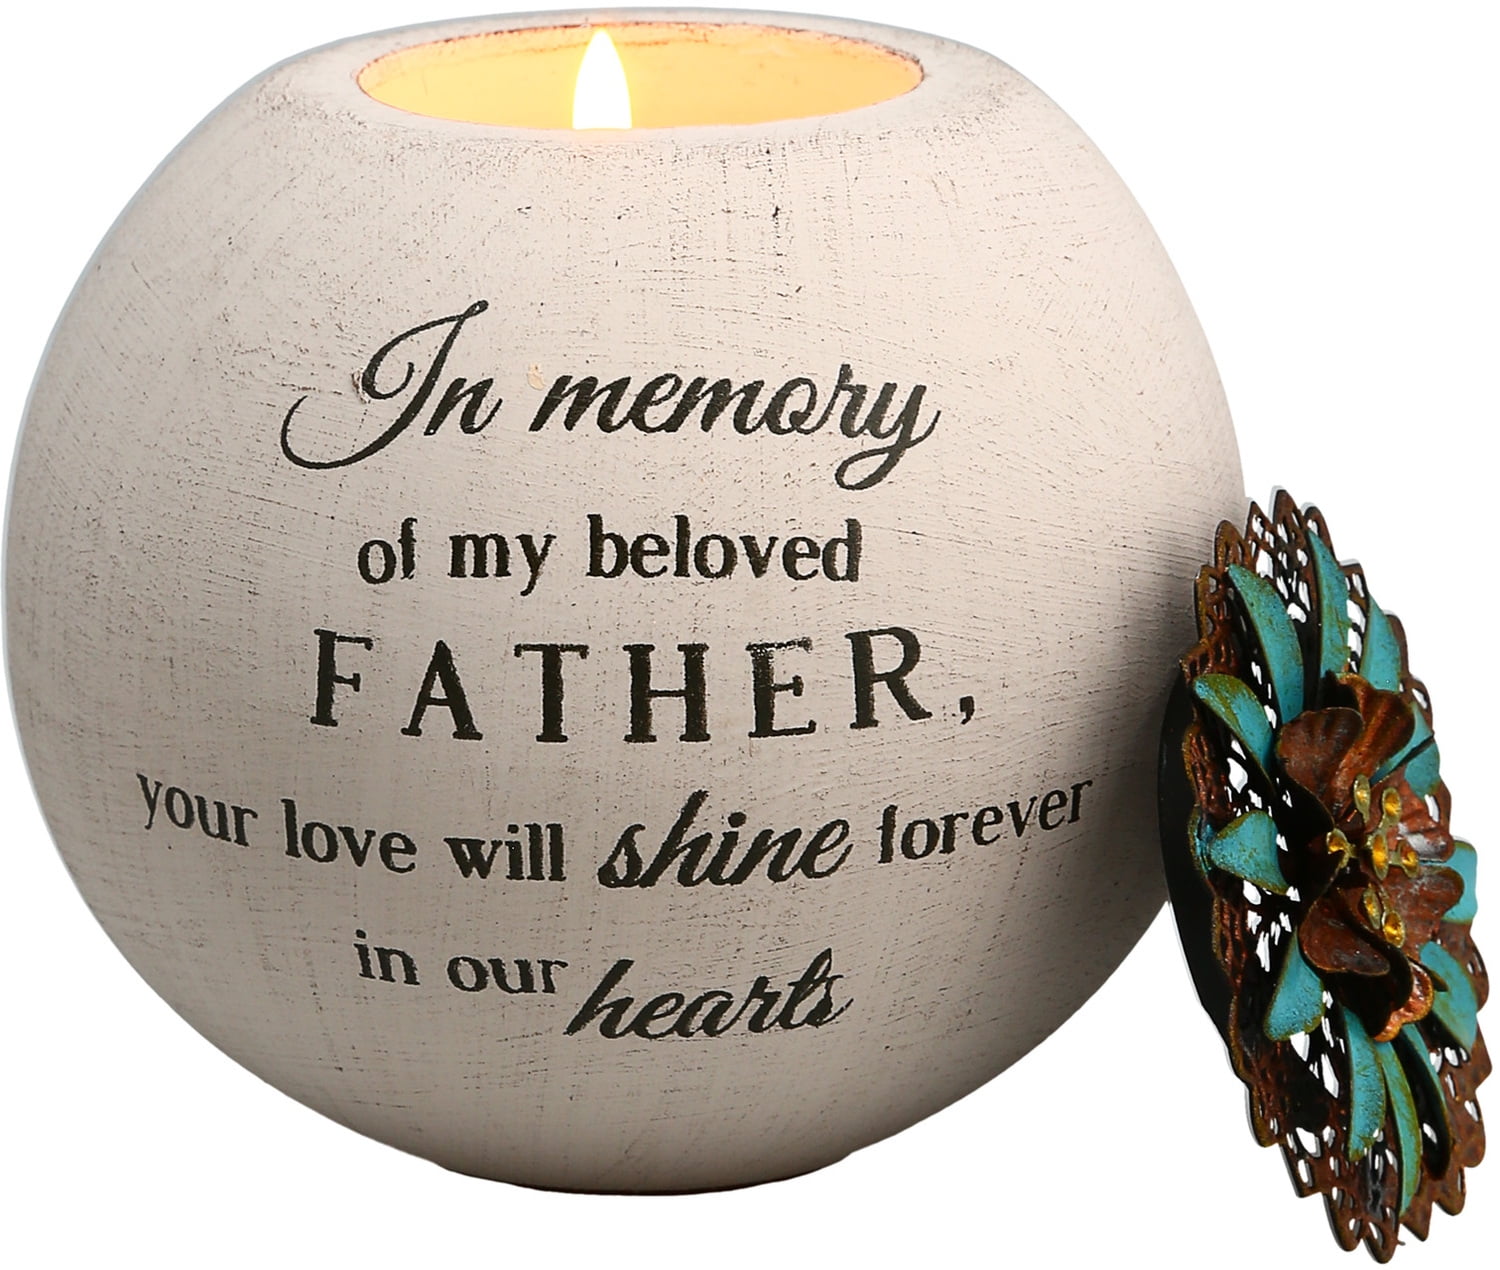 Personalised Engraved Cream Metal Tealight Holder with Forever in our Hearts Design Gift Boxed